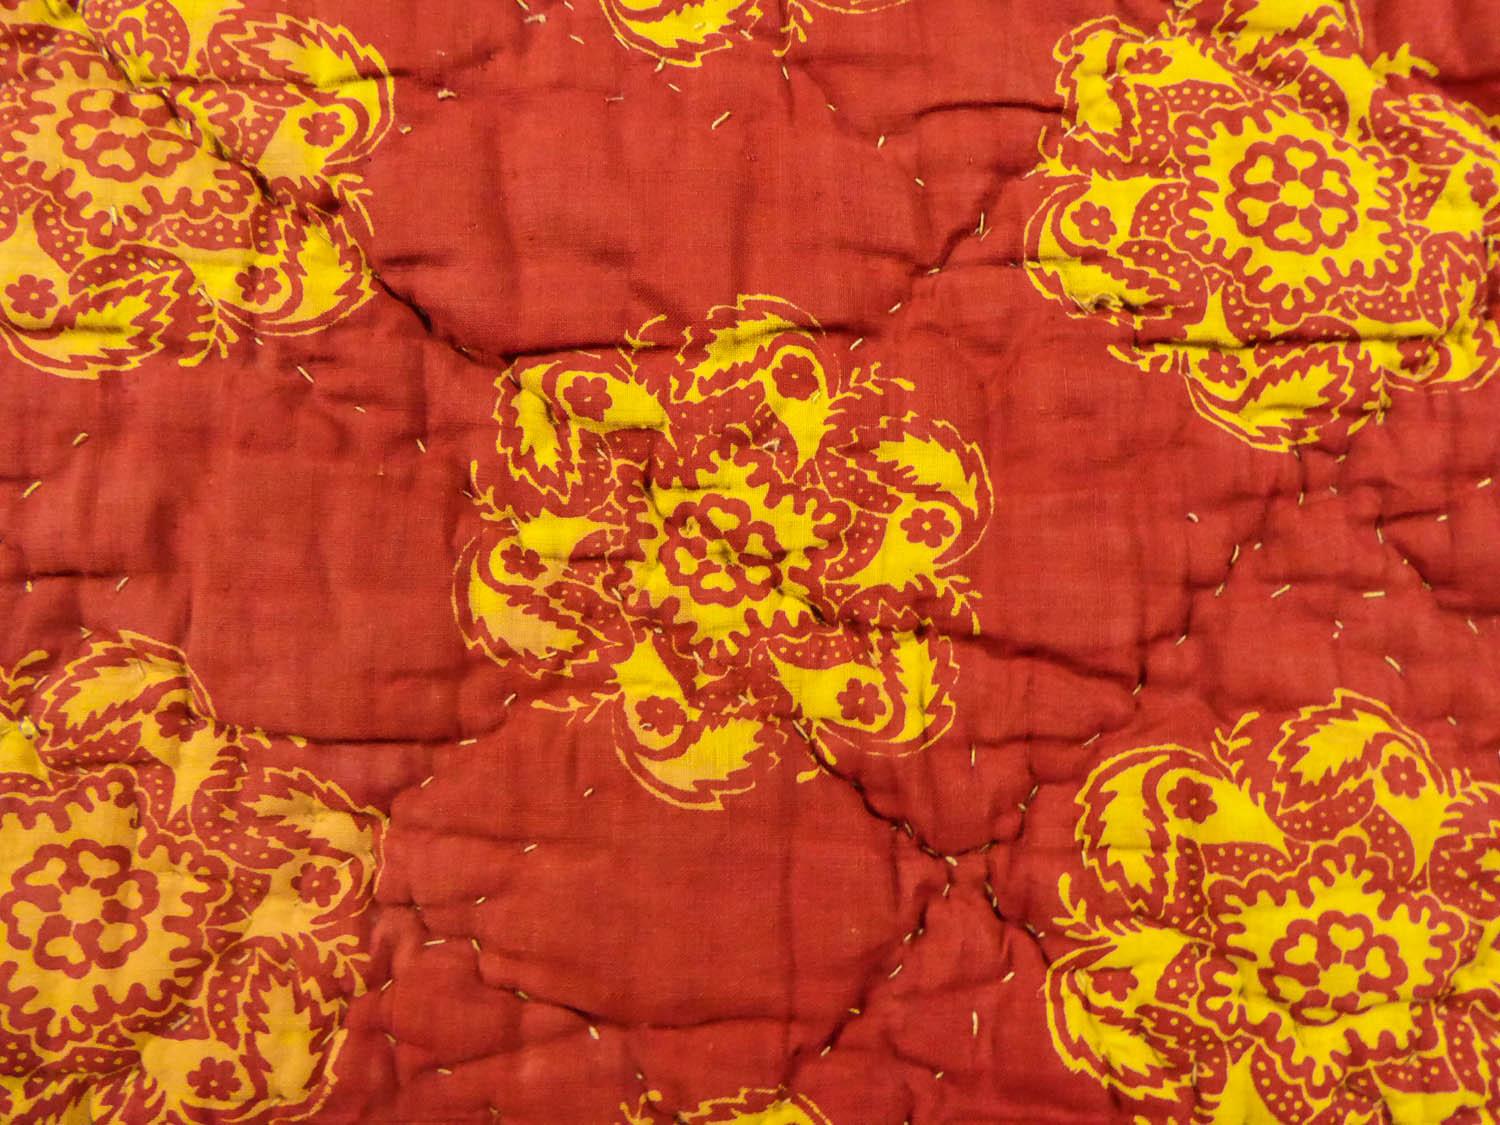 A french 18th indigo wax resist-dying quilt - Provence Circa 1780 9